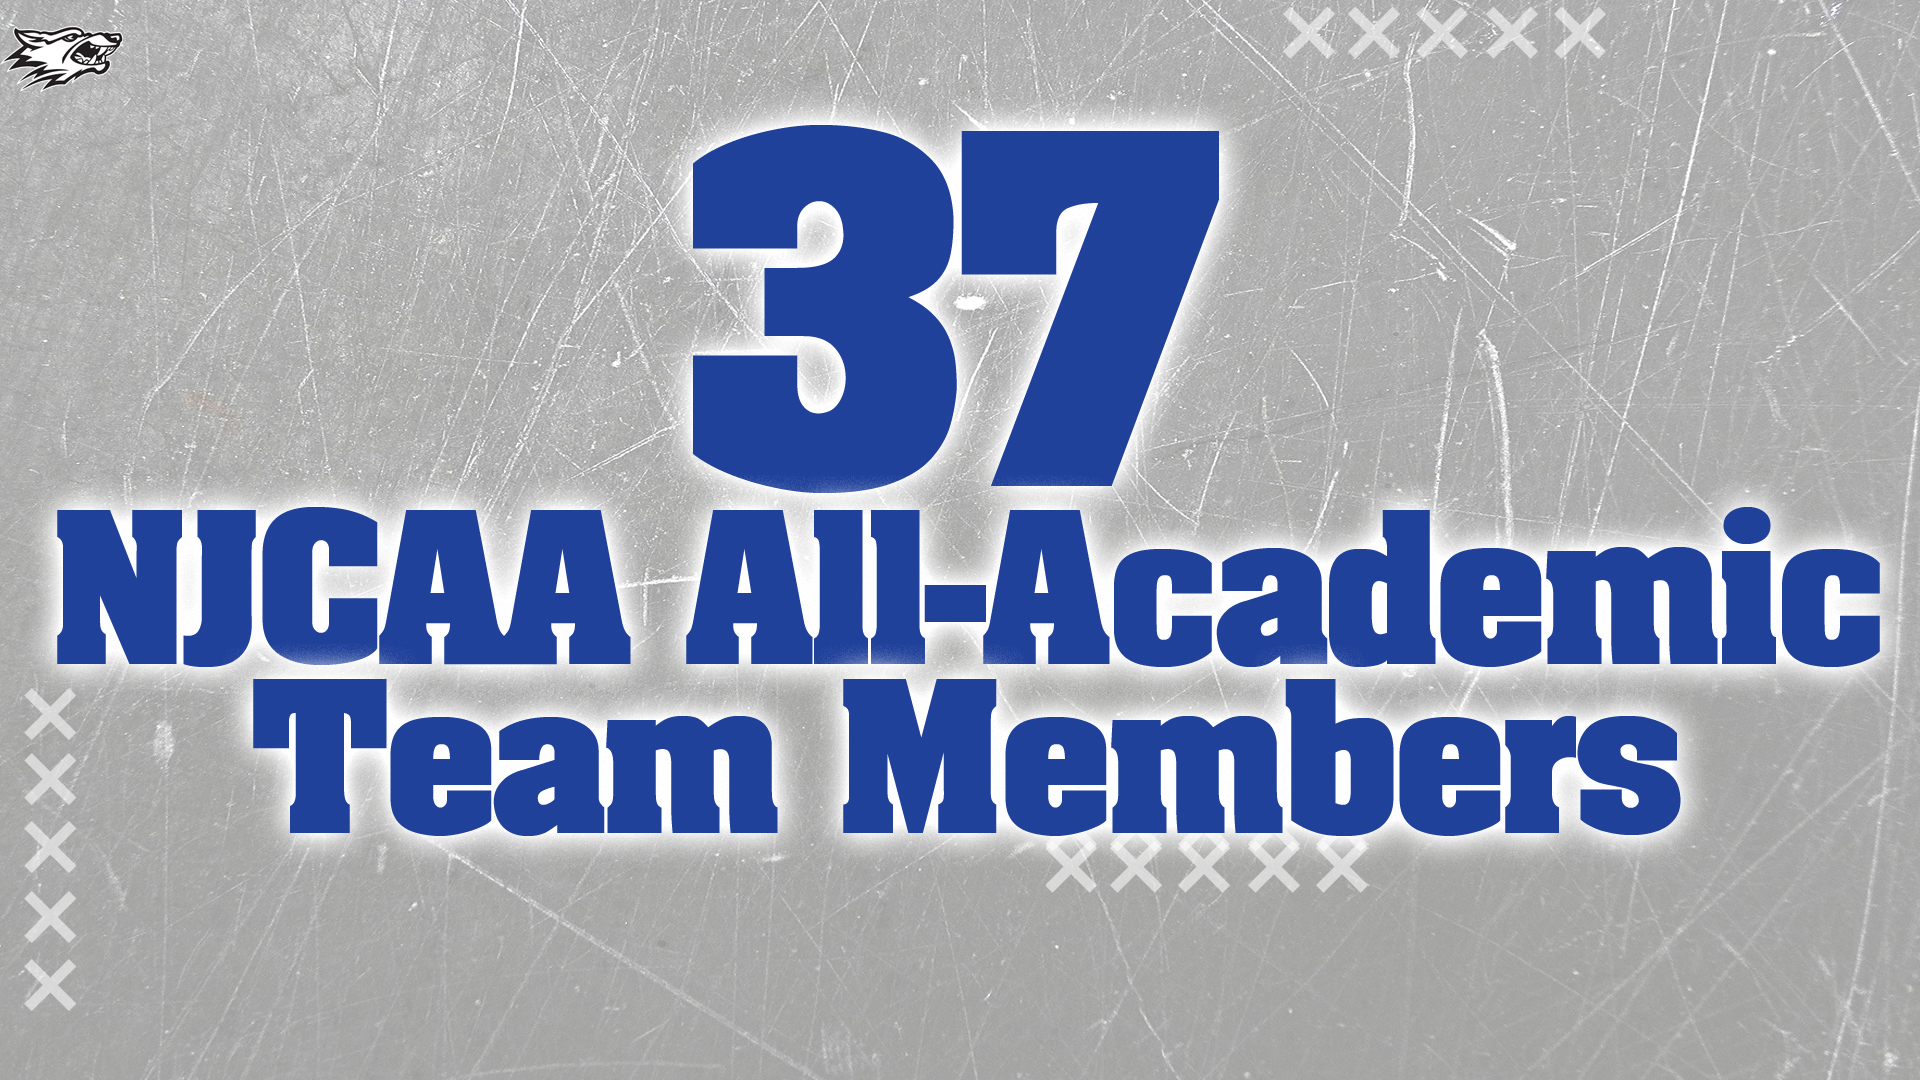 37 Co-Lin student-athletes named to NJCAA All-Academic Teams